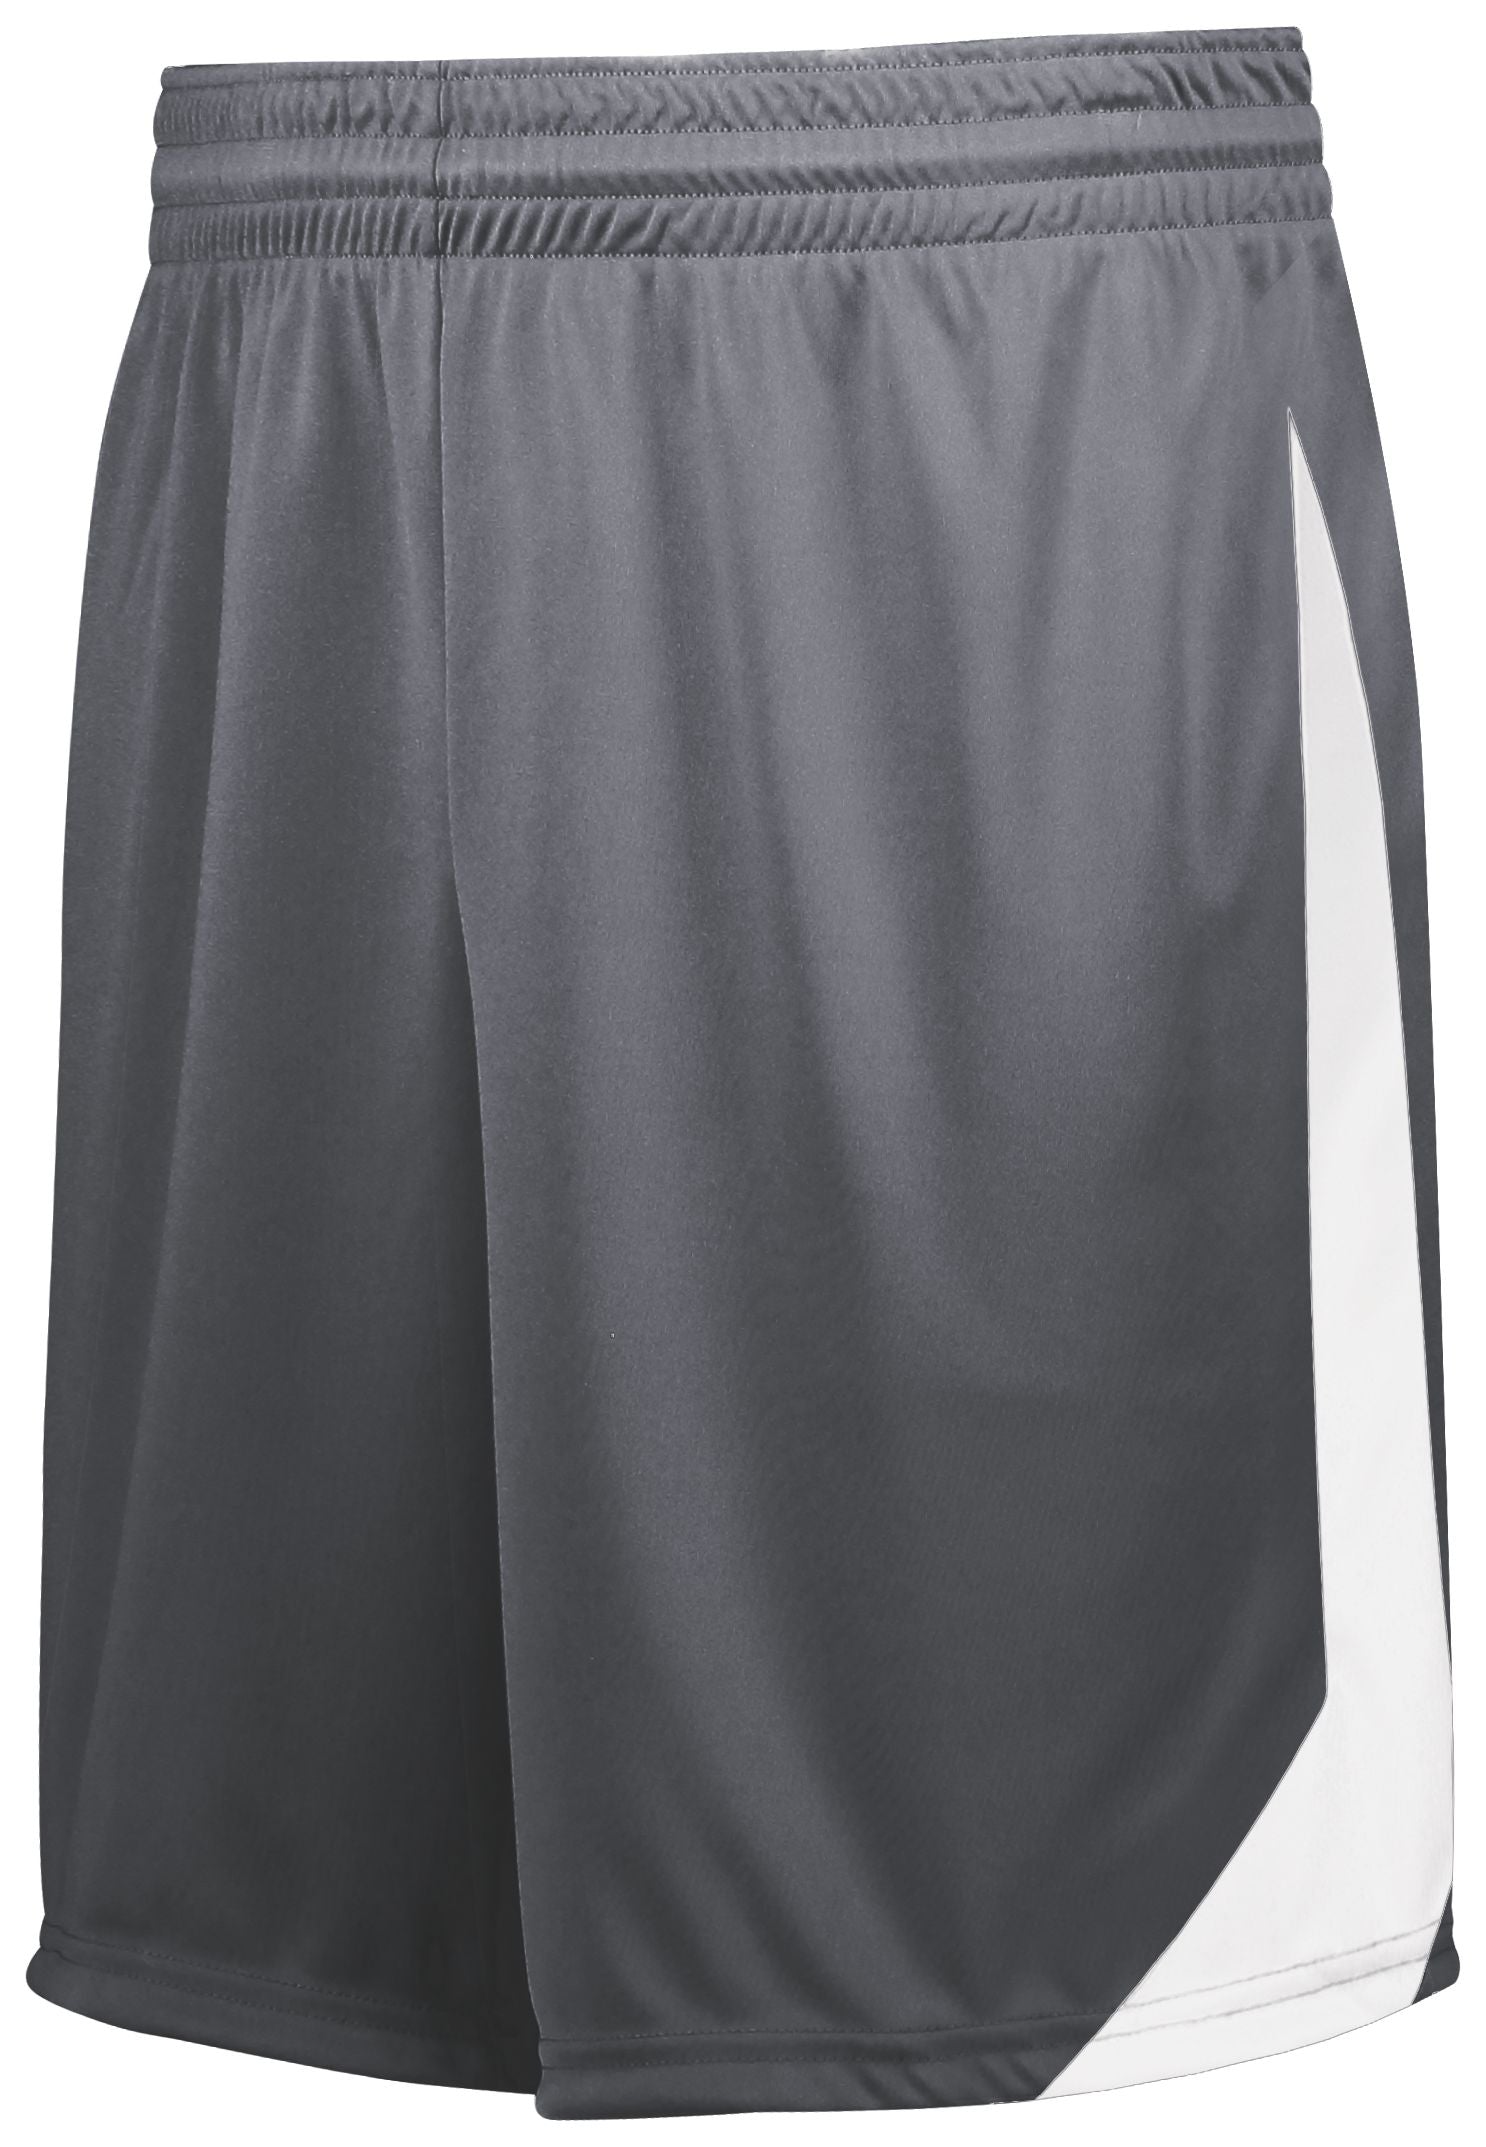 High 5 Youth Athletico Shorts in Graphite/White  -Part of the Youth, Youth-Shorts, High5-Products, Soccer, All-Sports-1 product lines at KanaleyCreations.com